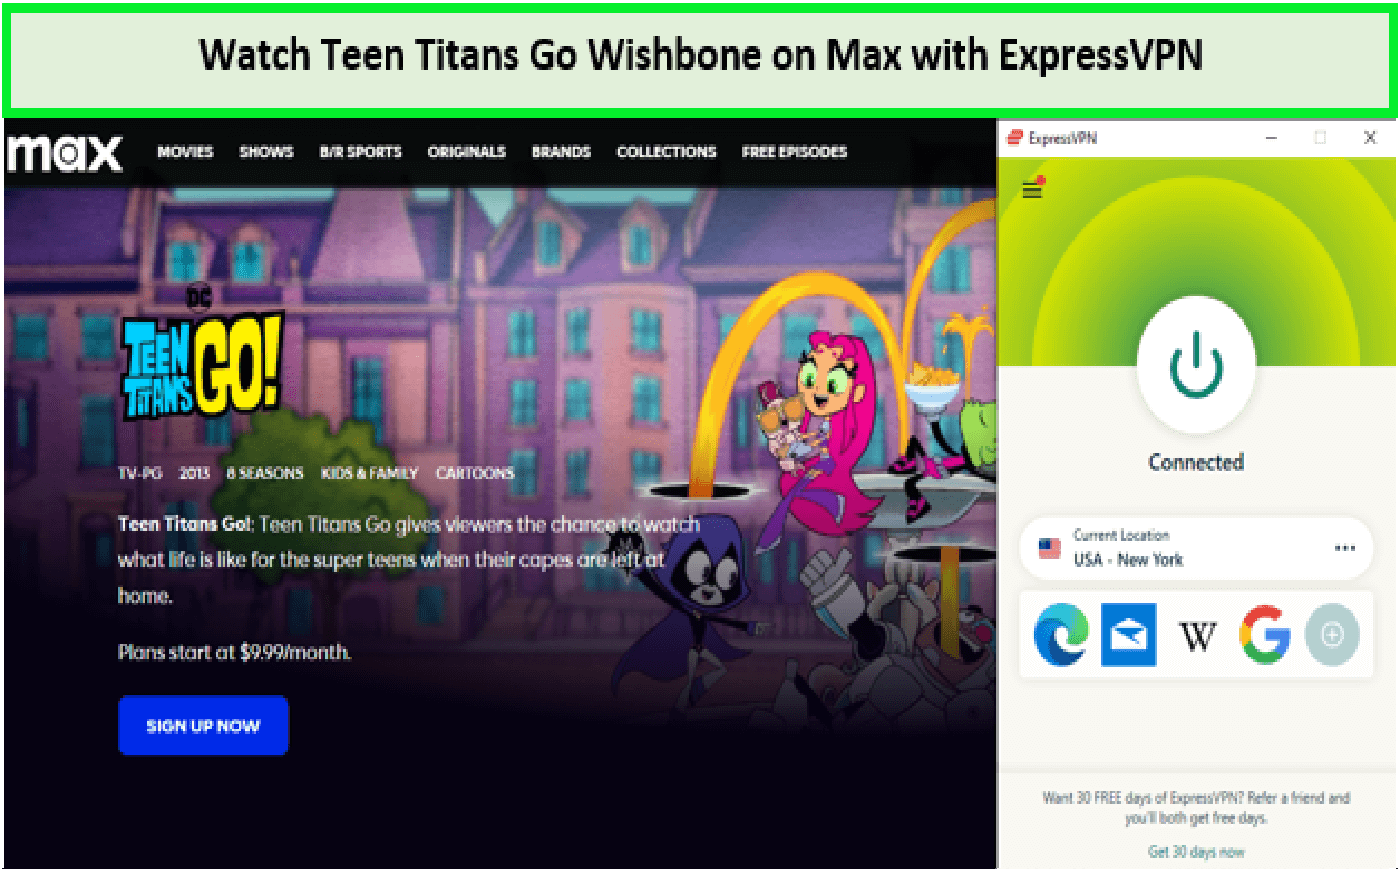 Watch-Teen-Titans-Go-Wishbone-in-Canada-on-Max-with-ExpressVPN